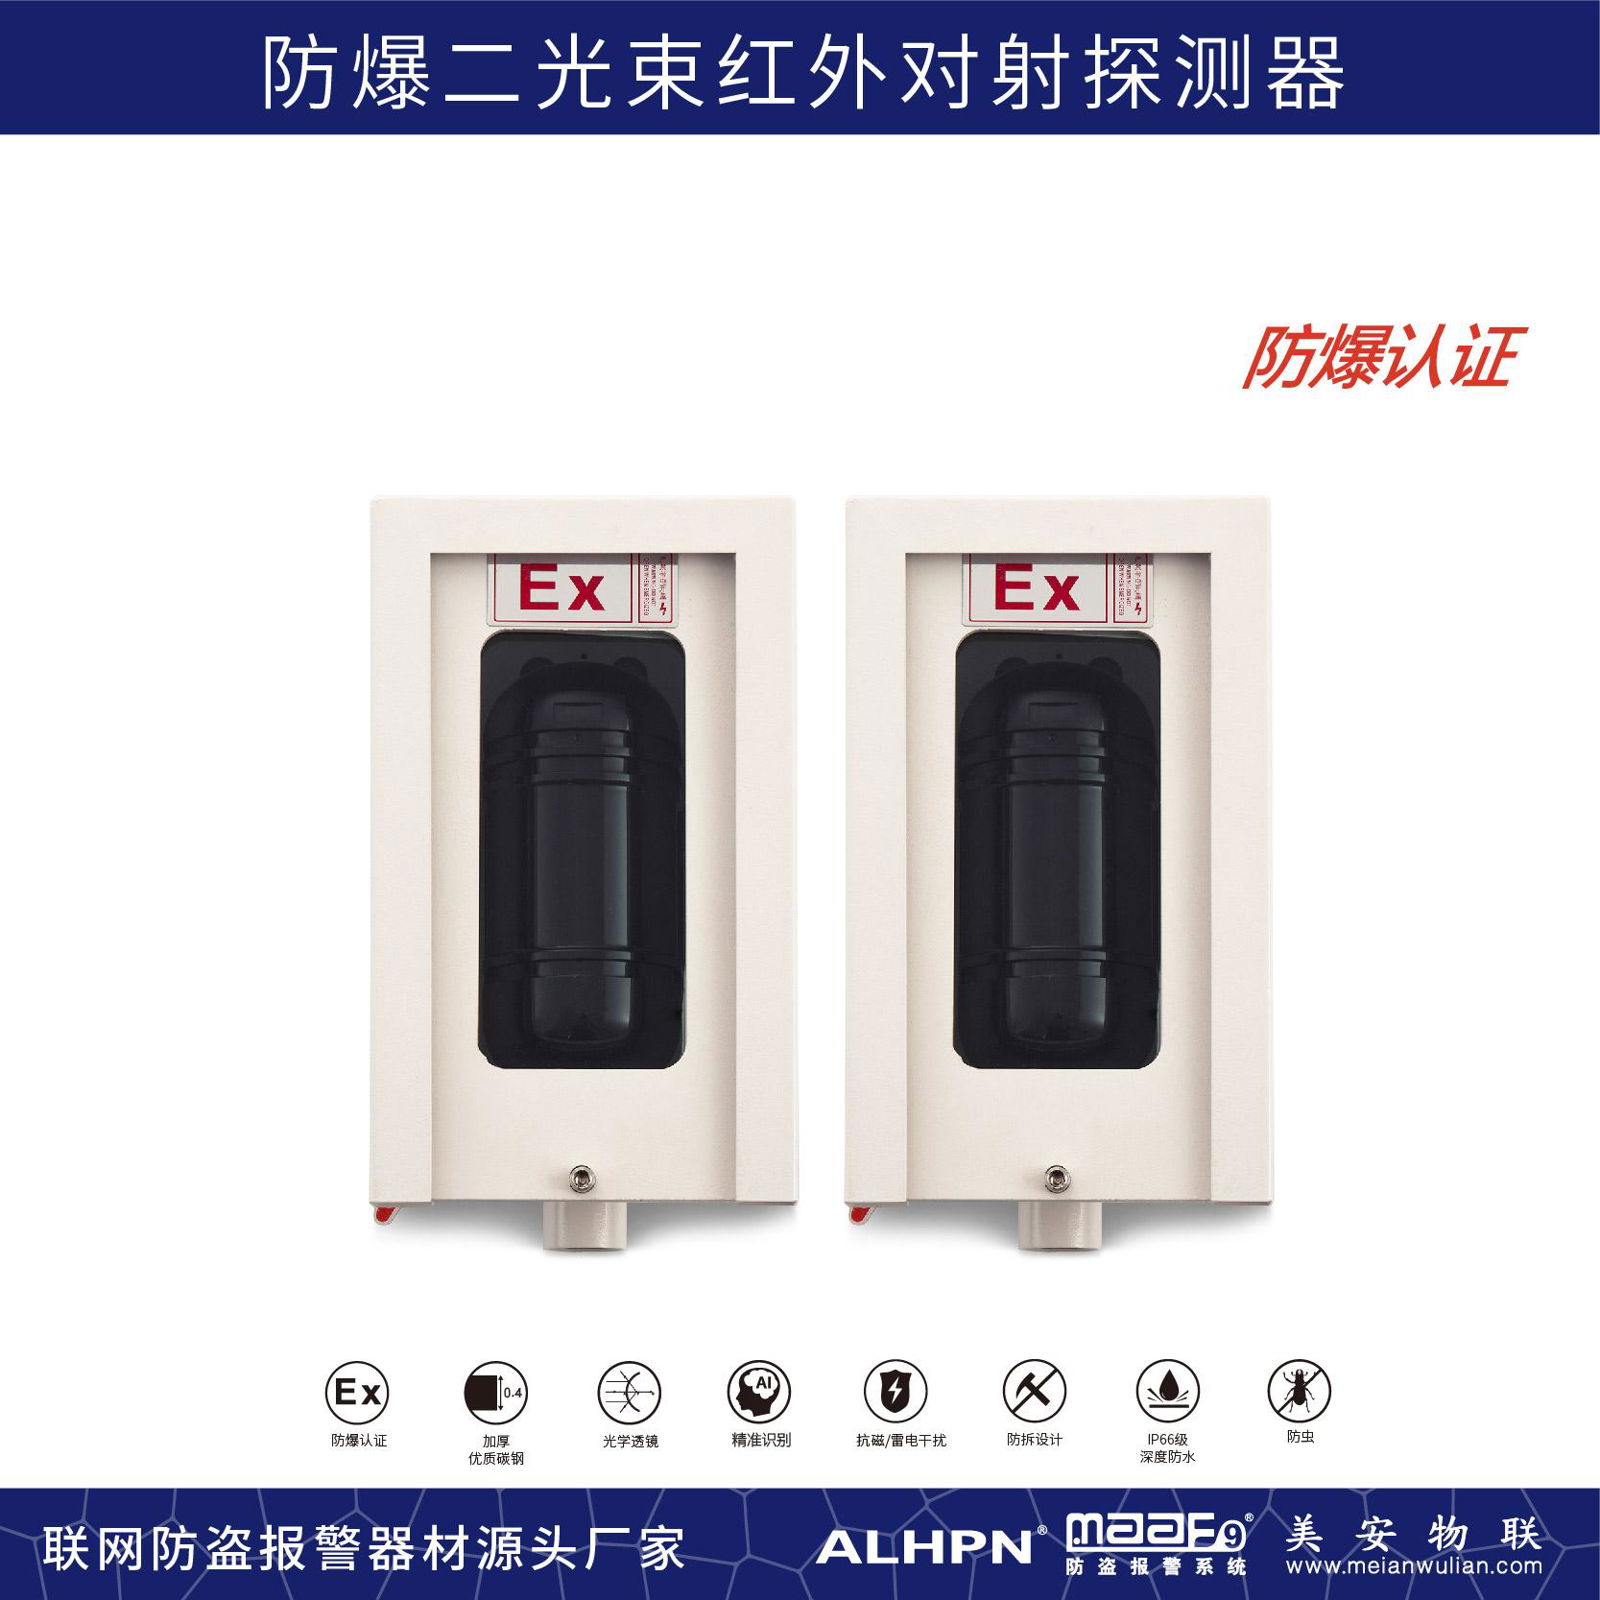 Explosion-proof infrared detector ABT-EX